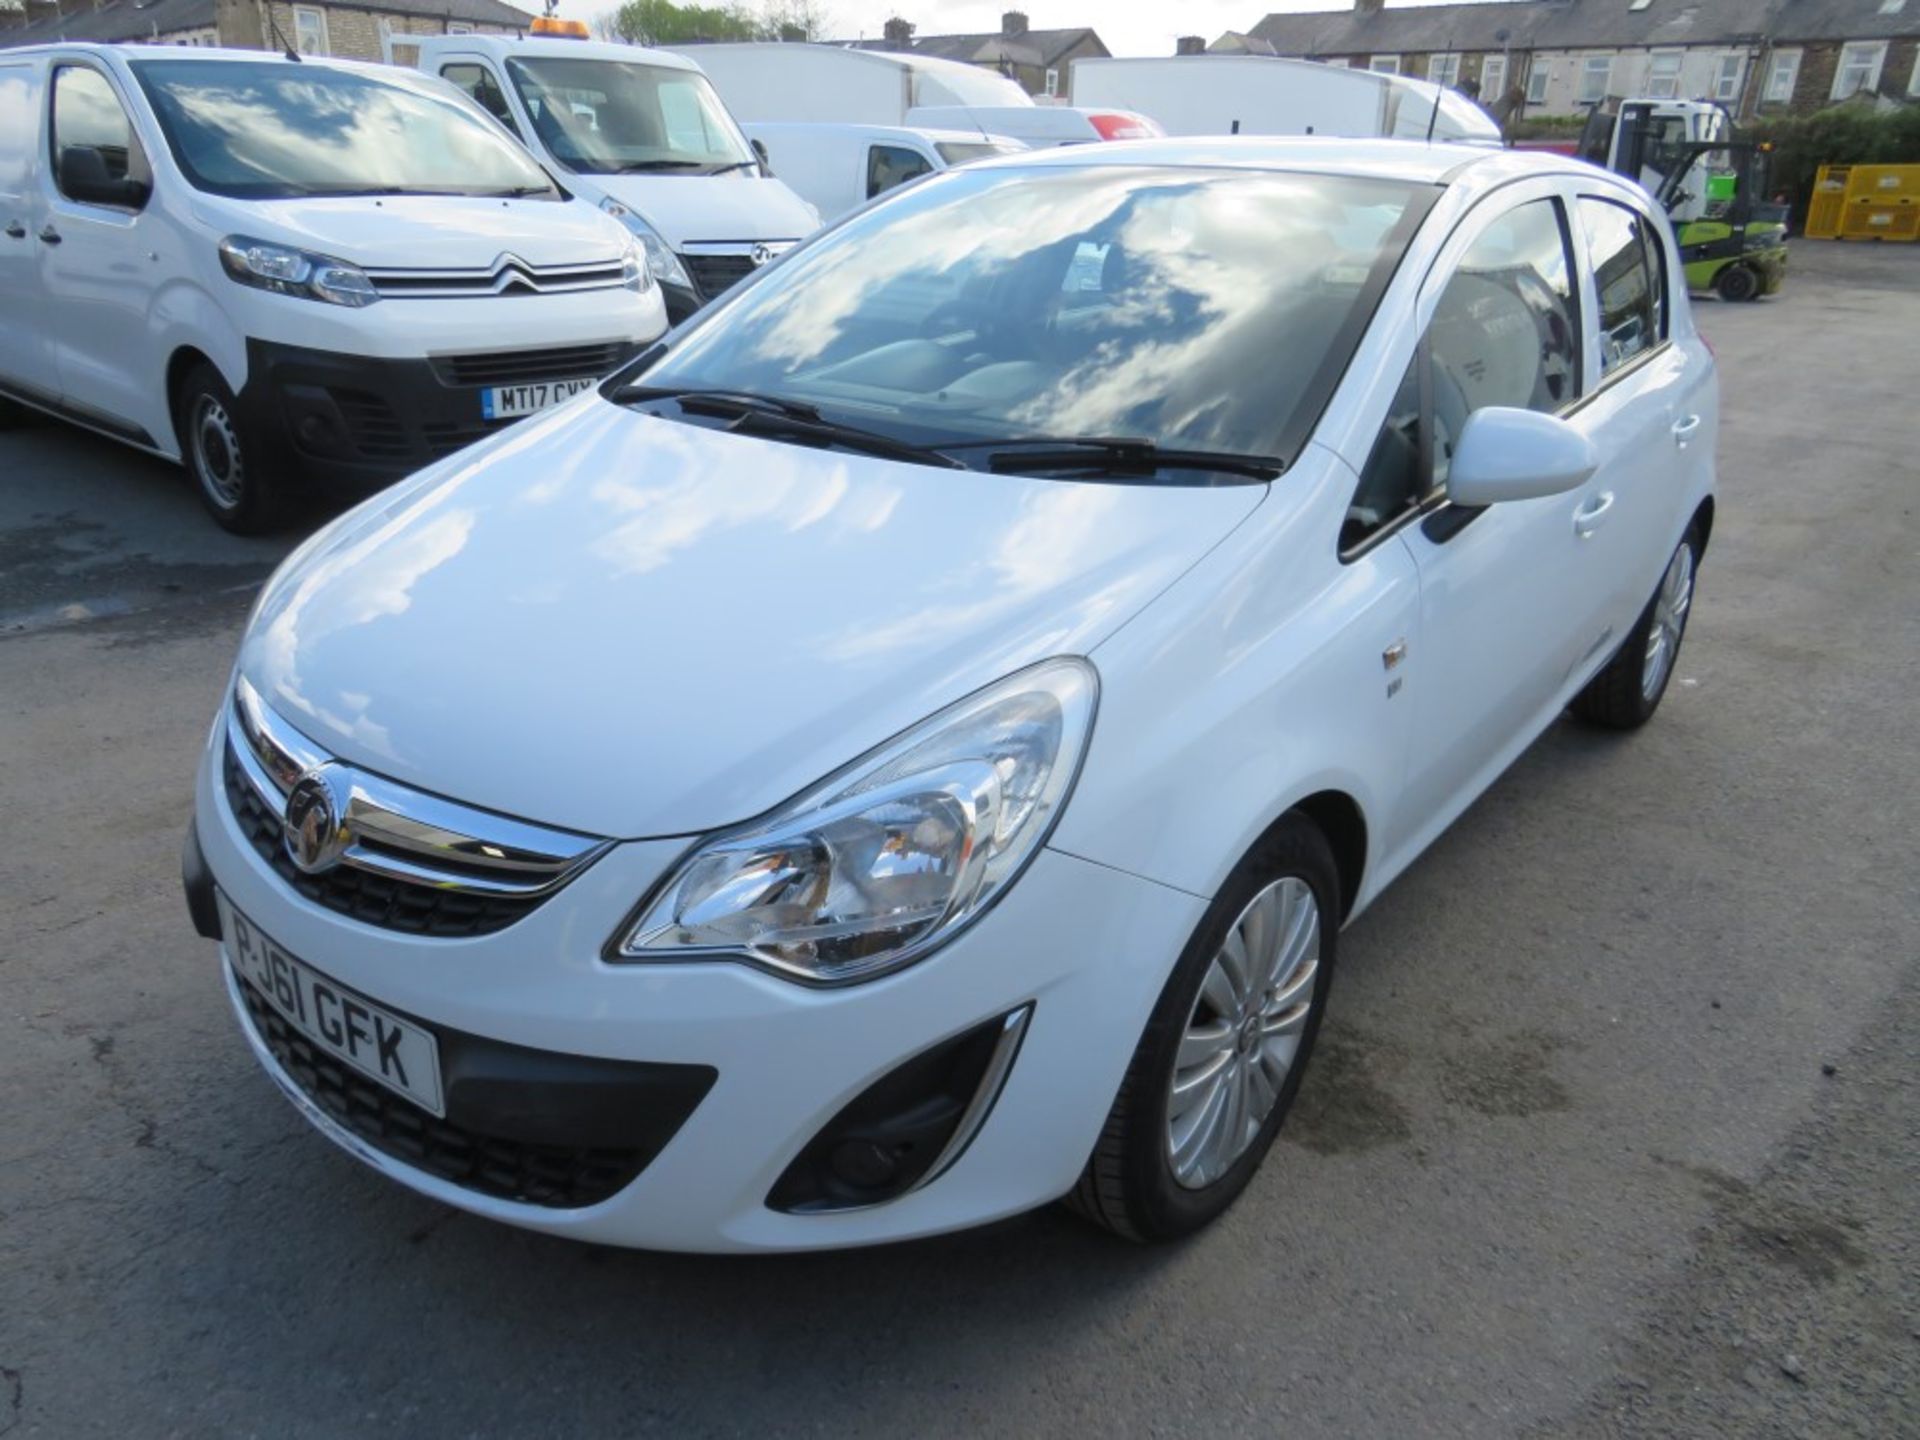 61 reg VAUXHALL CORSA EXCITE ECOLFEX 1.0 HATCHBACK (RUNS & DRIVES BUT ENGINE & HEAD GASKET FAULTS) - Image 2 of 6